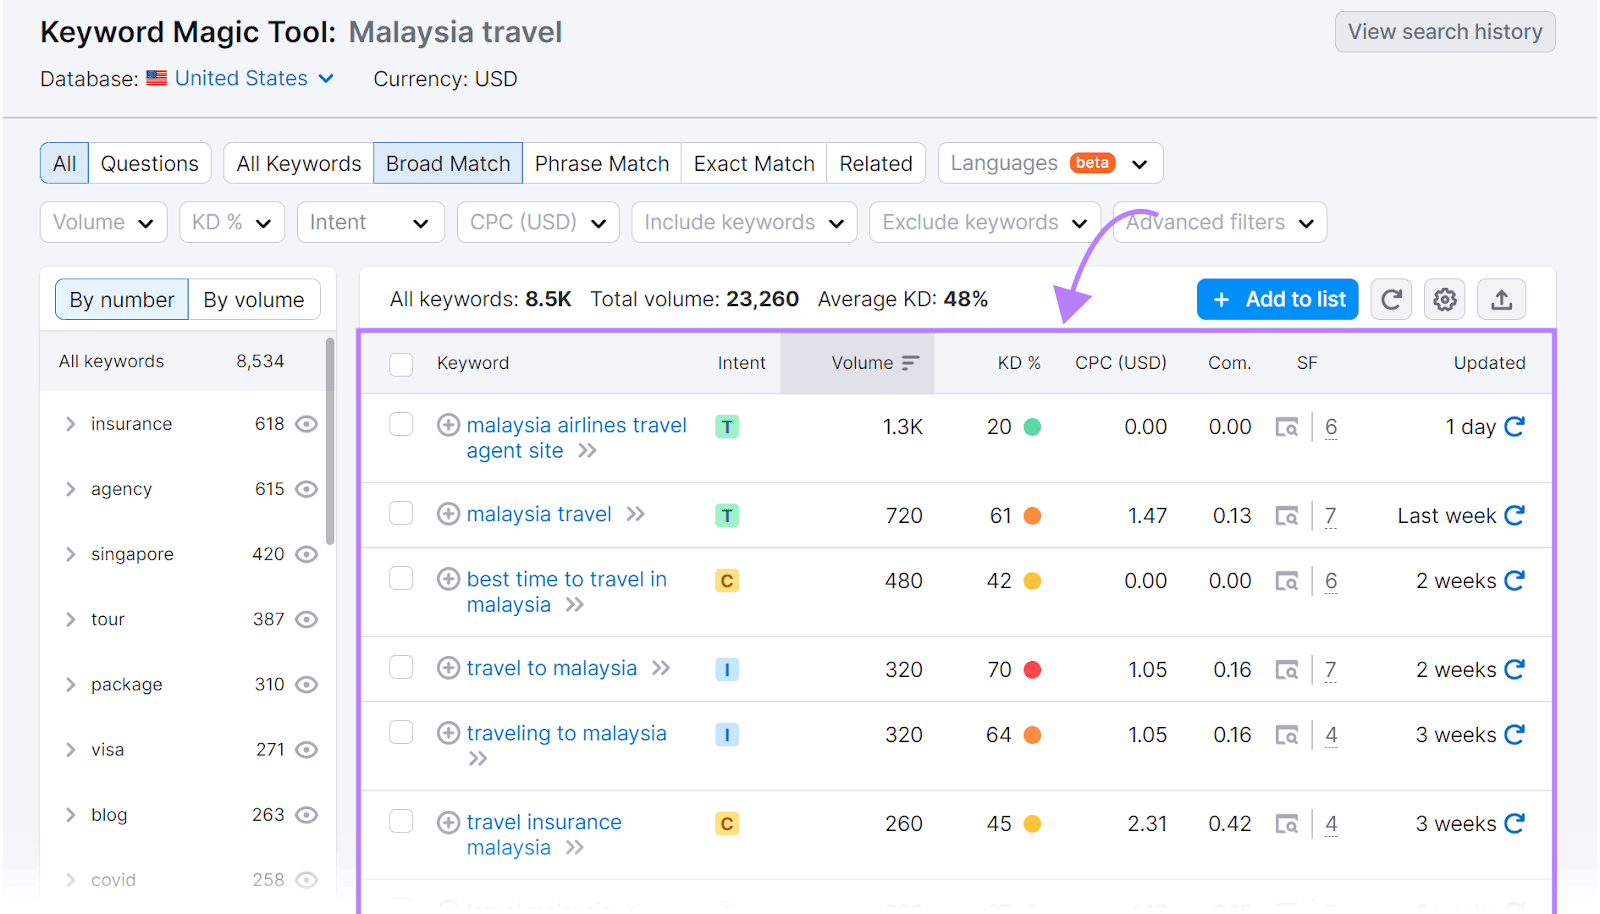 A list of keyword suggestions related to "Malaysia travel" in Keyword Magic Tool